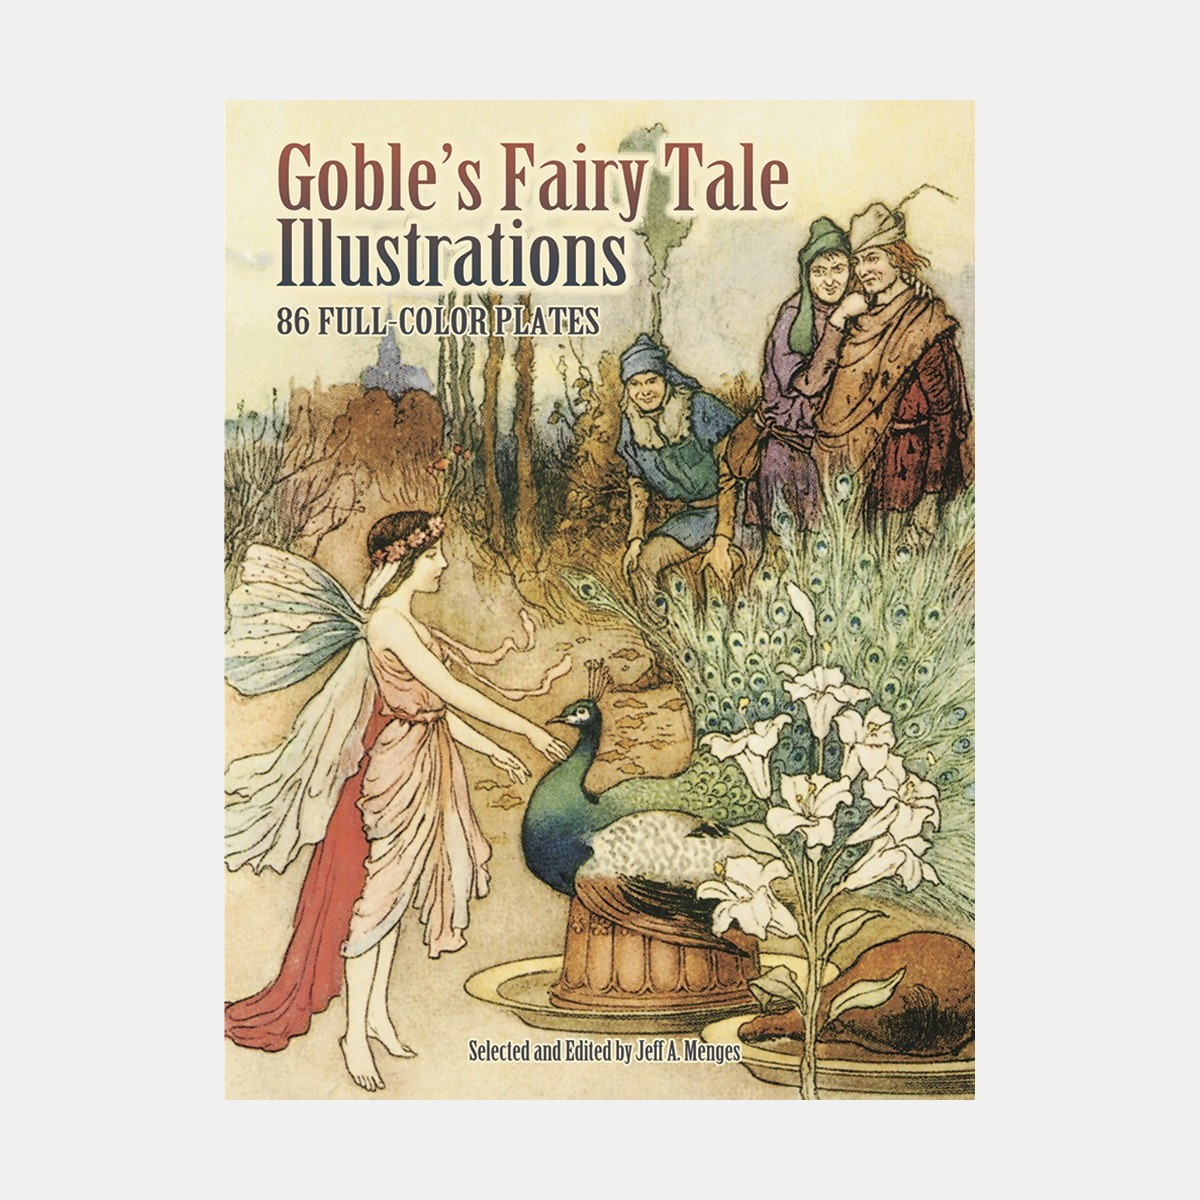 Goble's Fairy Tale Illustrations